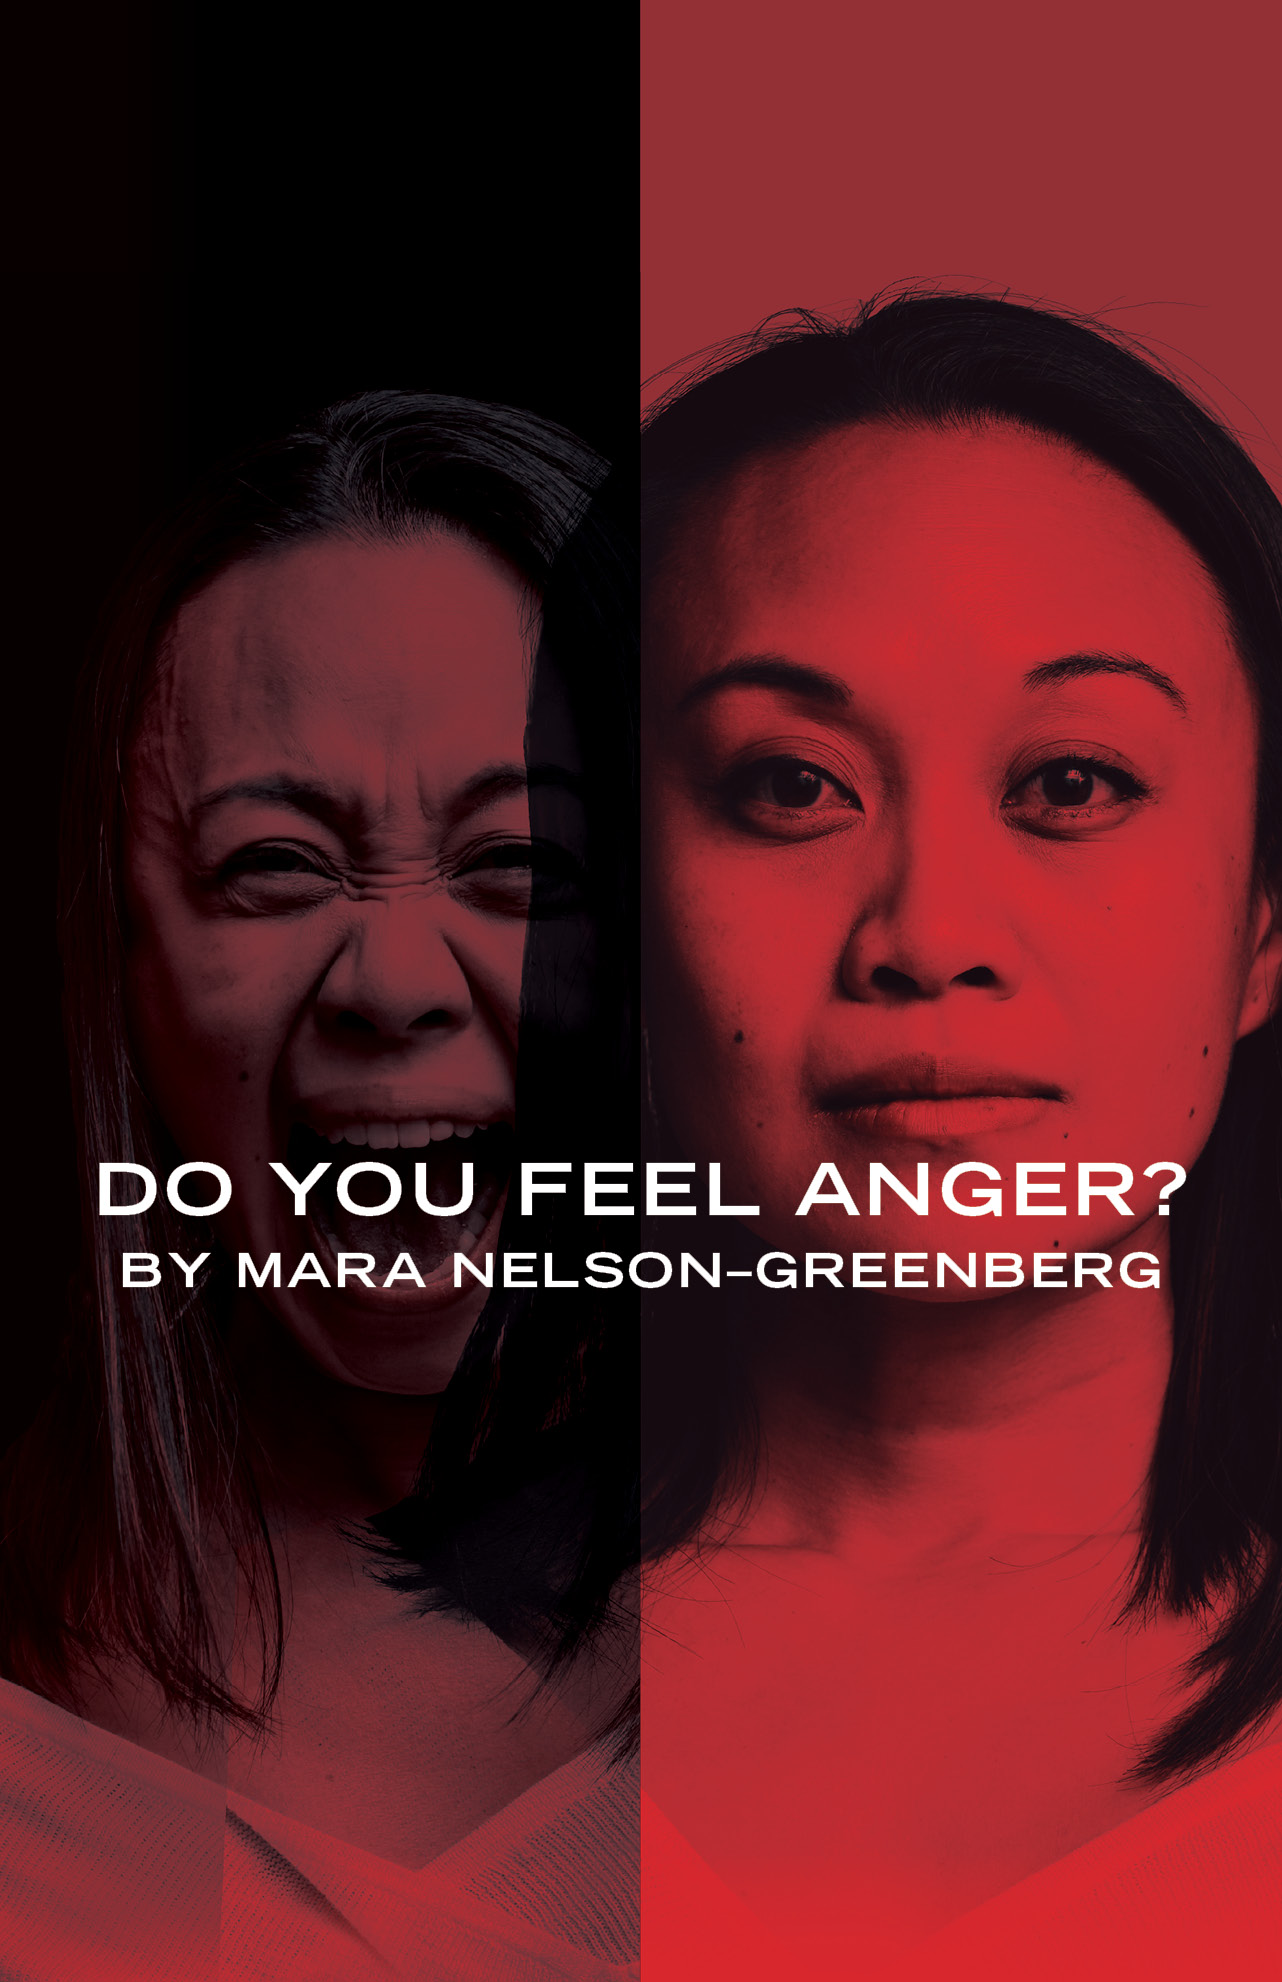 Written by Mara Nelson-Greenberg
Directed by Ensemble Member Jess McLeod
January 23 — March 15, 2020
Previews January 23 – February 1
Opening February 2
Red Night February 7
Regular Run February 6 – March 15
Open Captioned Performances February 27-28
Chicago Premiere
Sofia was recently hired as an empathy coach at a debt collection agency—and clearly, she has her work cut out for her. These employees can barely identify what an emotion is, much less practice deep, radical compassion for others. And while they painstakingly stumble towards enlightenment, someone keeps mugging Eva in the kitchen. An outrageous play about the absurdity—and the danger of complicity in a world where some people’s feelings matter more than others.